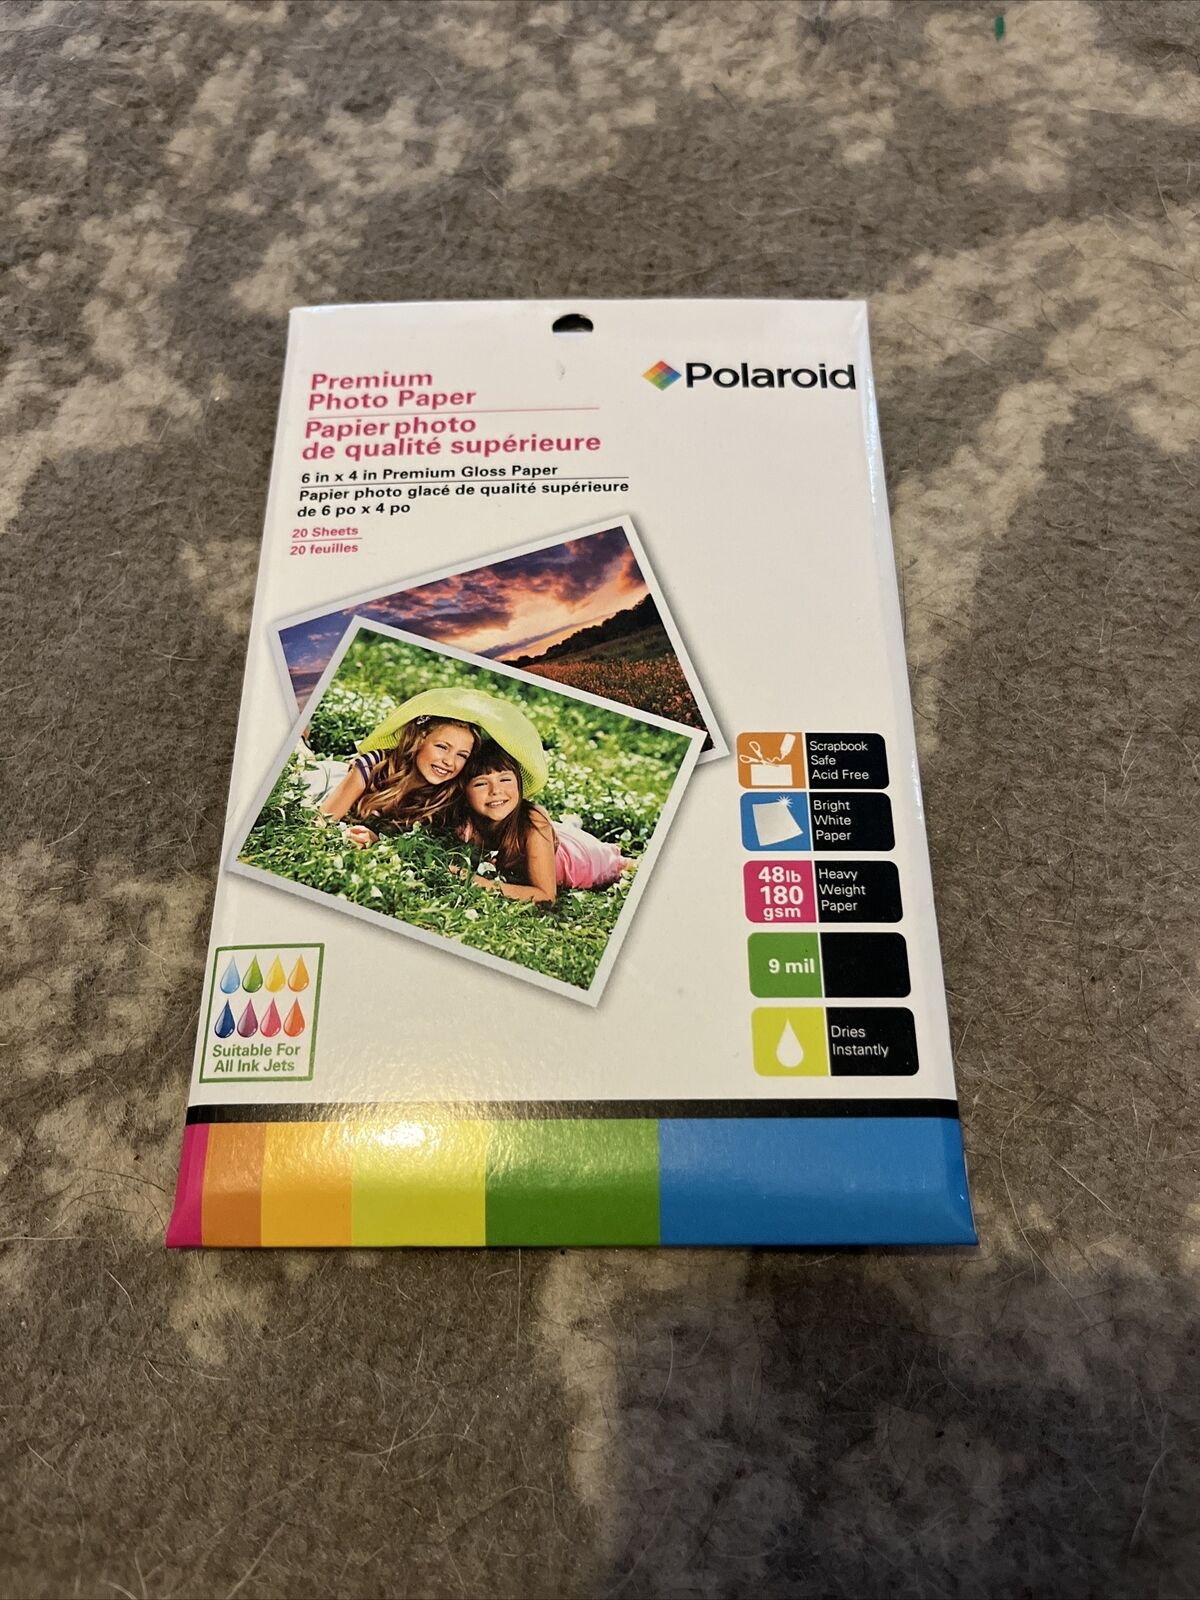 Polaroid Premium Photo Paper  6 in. x 4 in Gloss Paper 12 sheets New Seal Intact